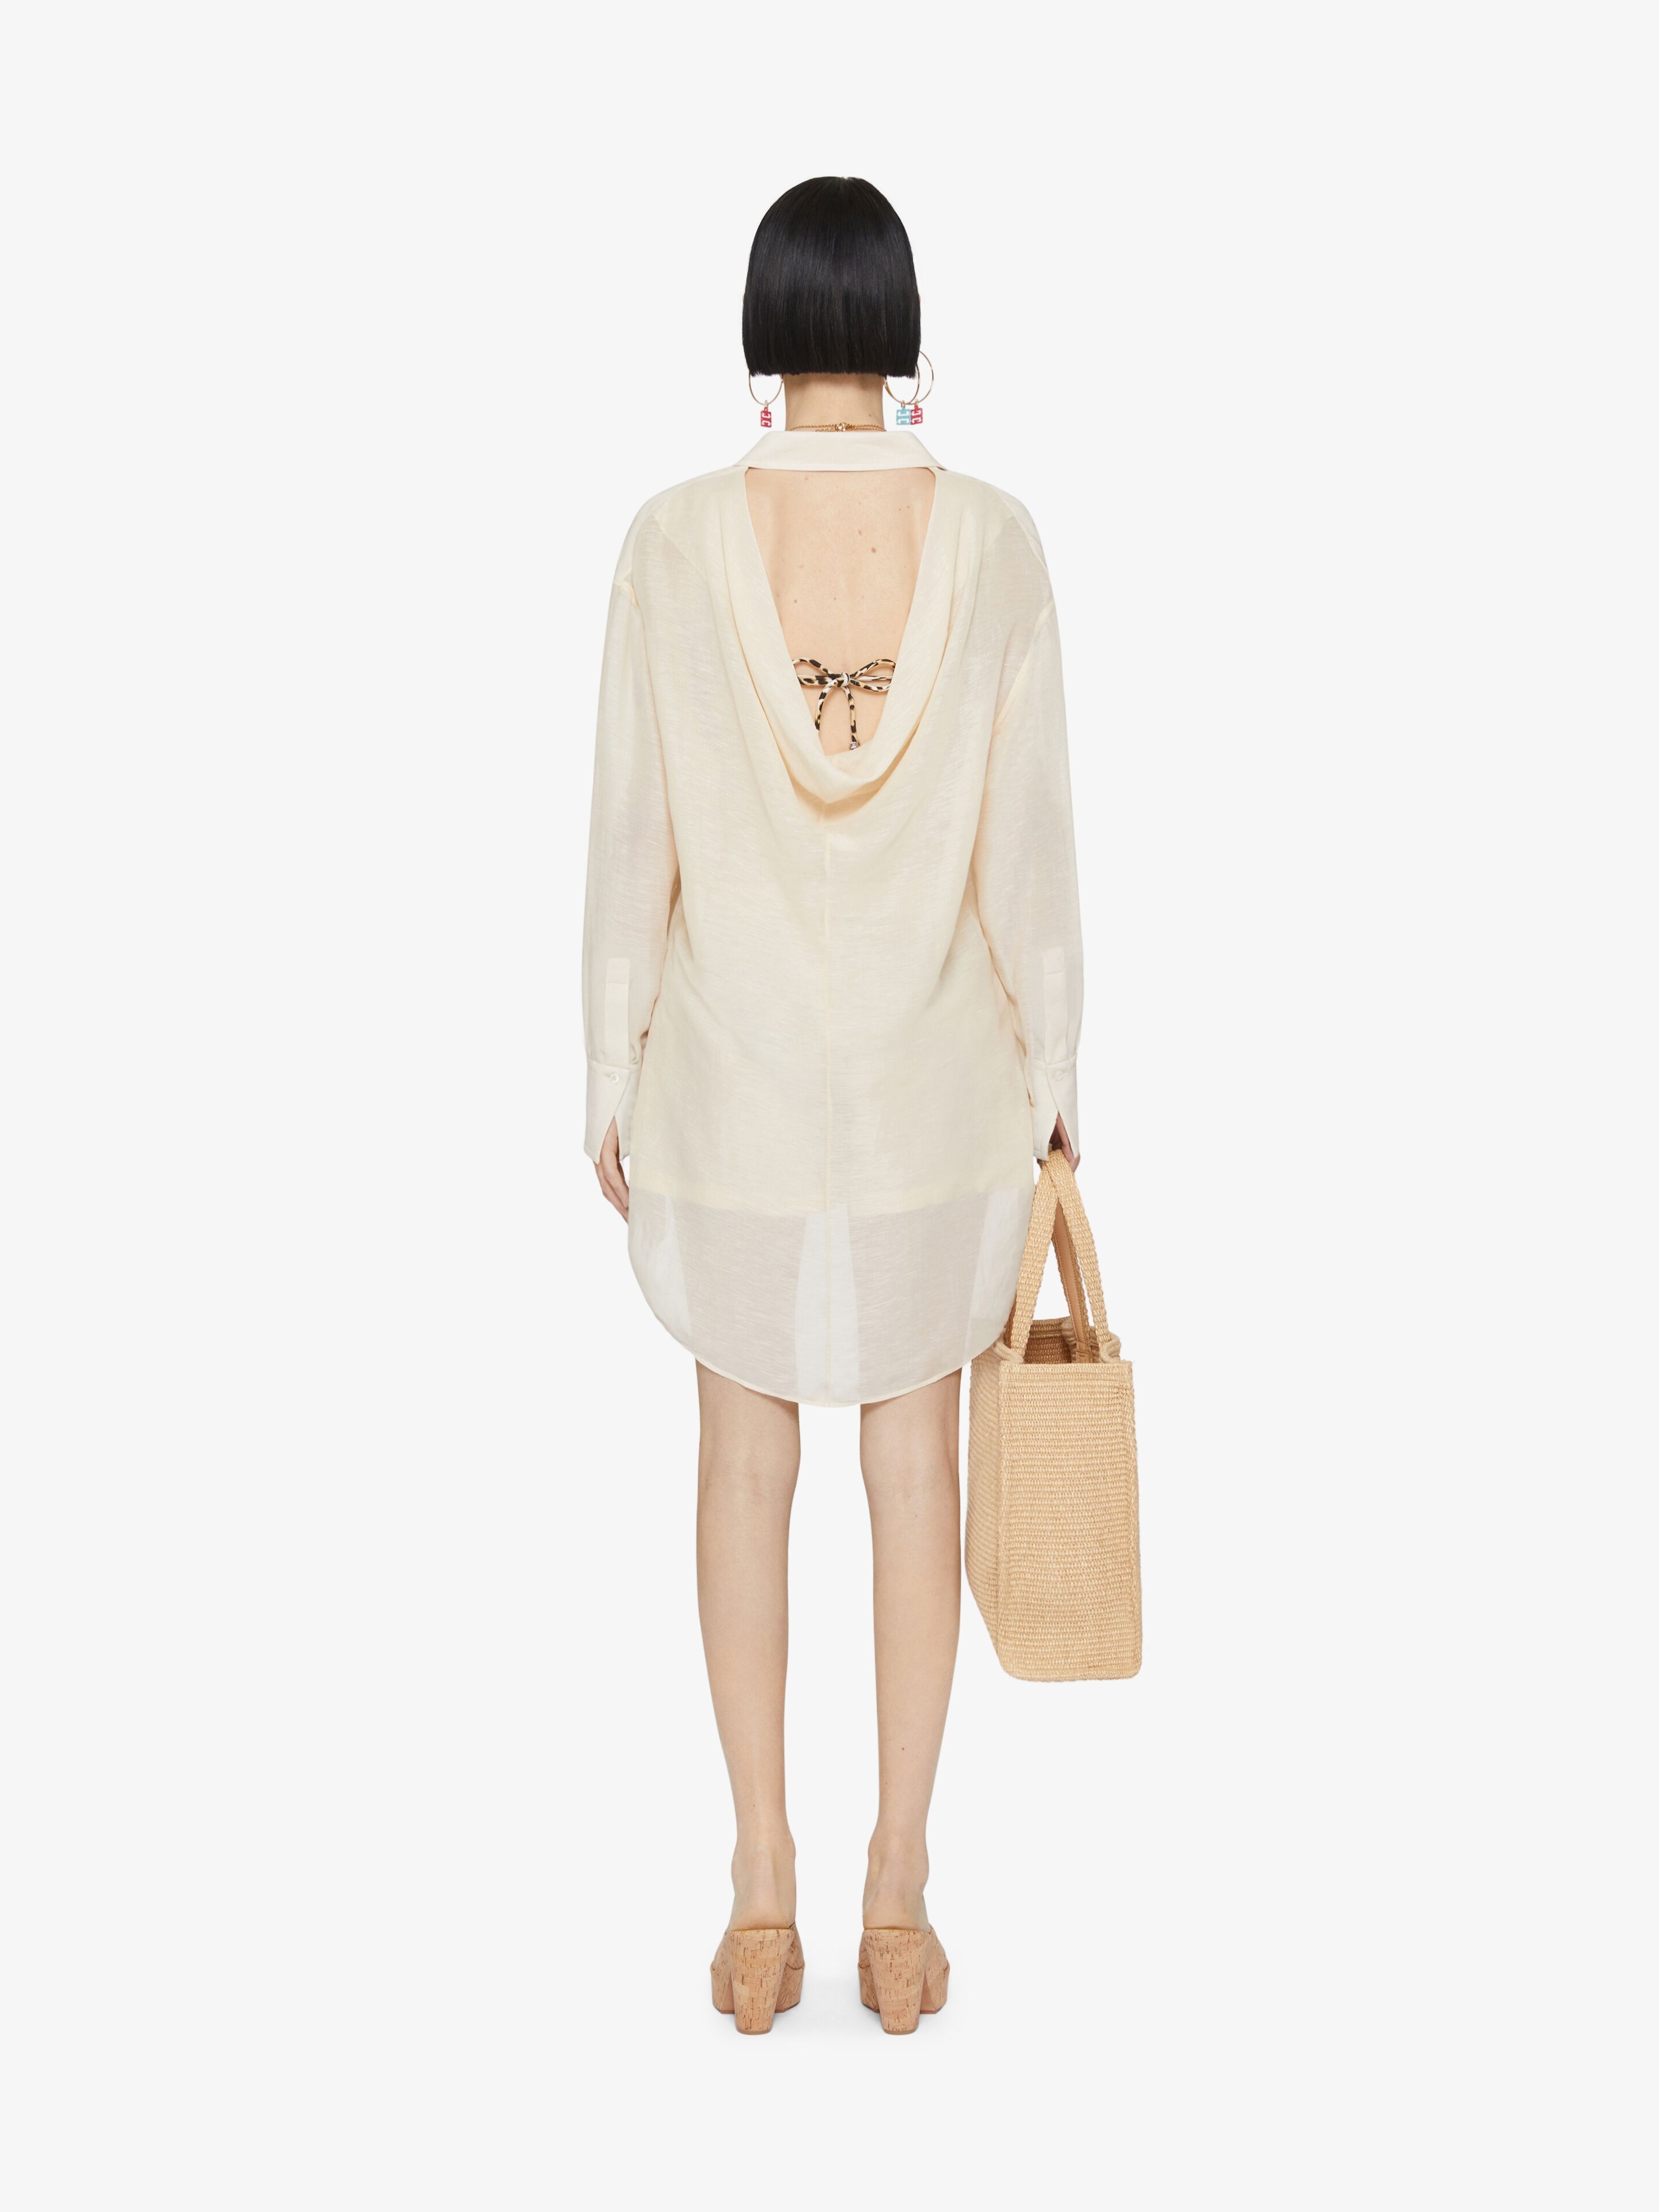 OVERSIZED SHIRT IN SILK AND LINEN WITH DRAPED BACK - 4